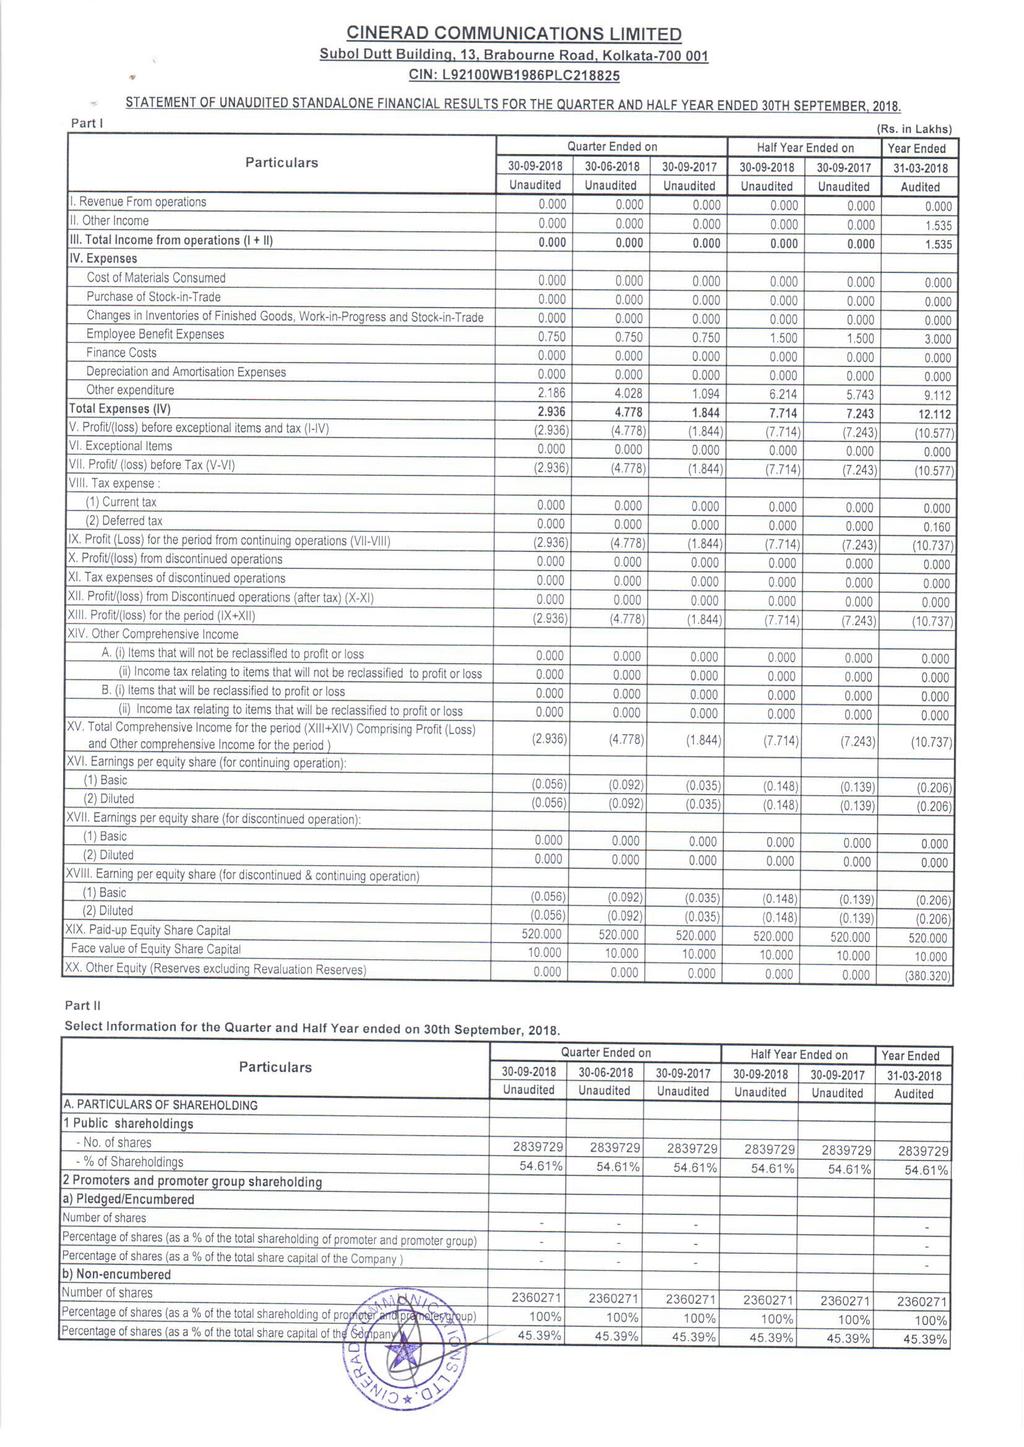 CINERAD COMMUNICATIONS LIMITED Subol Dutt Building, 13, Brabourne Road, Kolkata-700 001 CIN: L92100WB1986PLC218825 STATEMENT OF UNAUDITED STANDALONE FINANCIAL RESULTS FOR THE QUARTER AND HALF YEAR